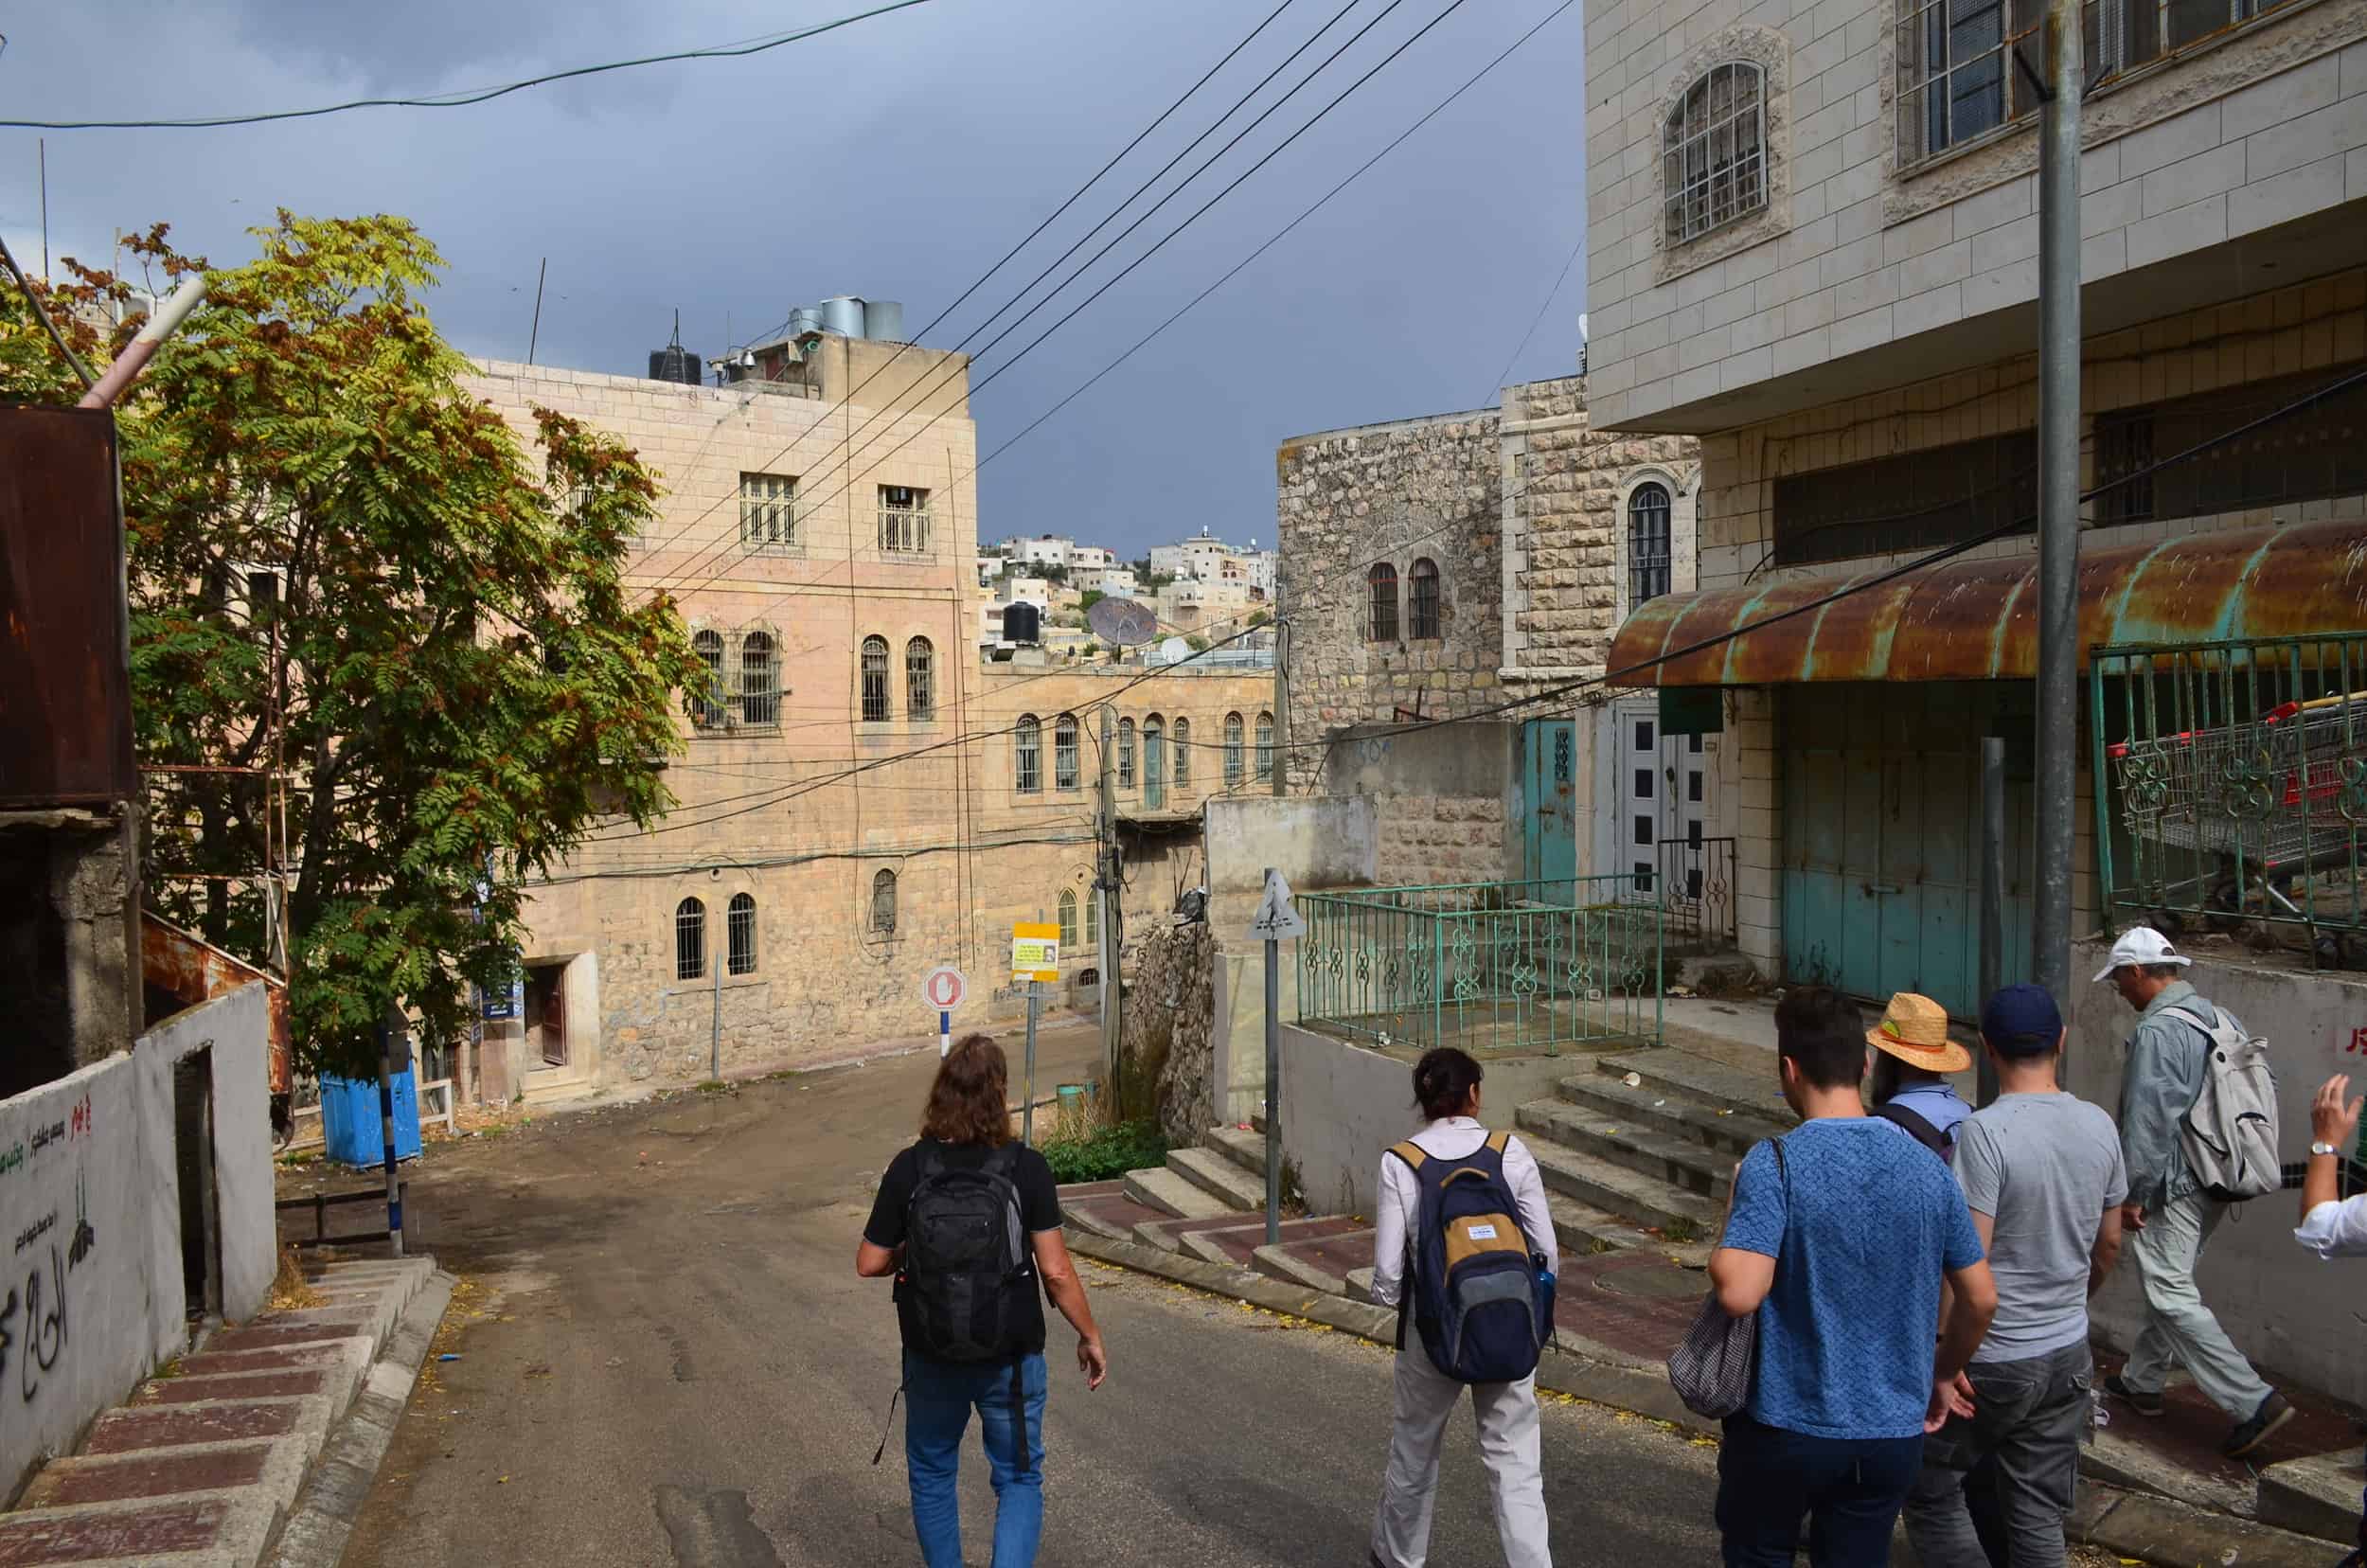 Walking down to the checkpoint at Tel Rumeida in Hebron, Palestine